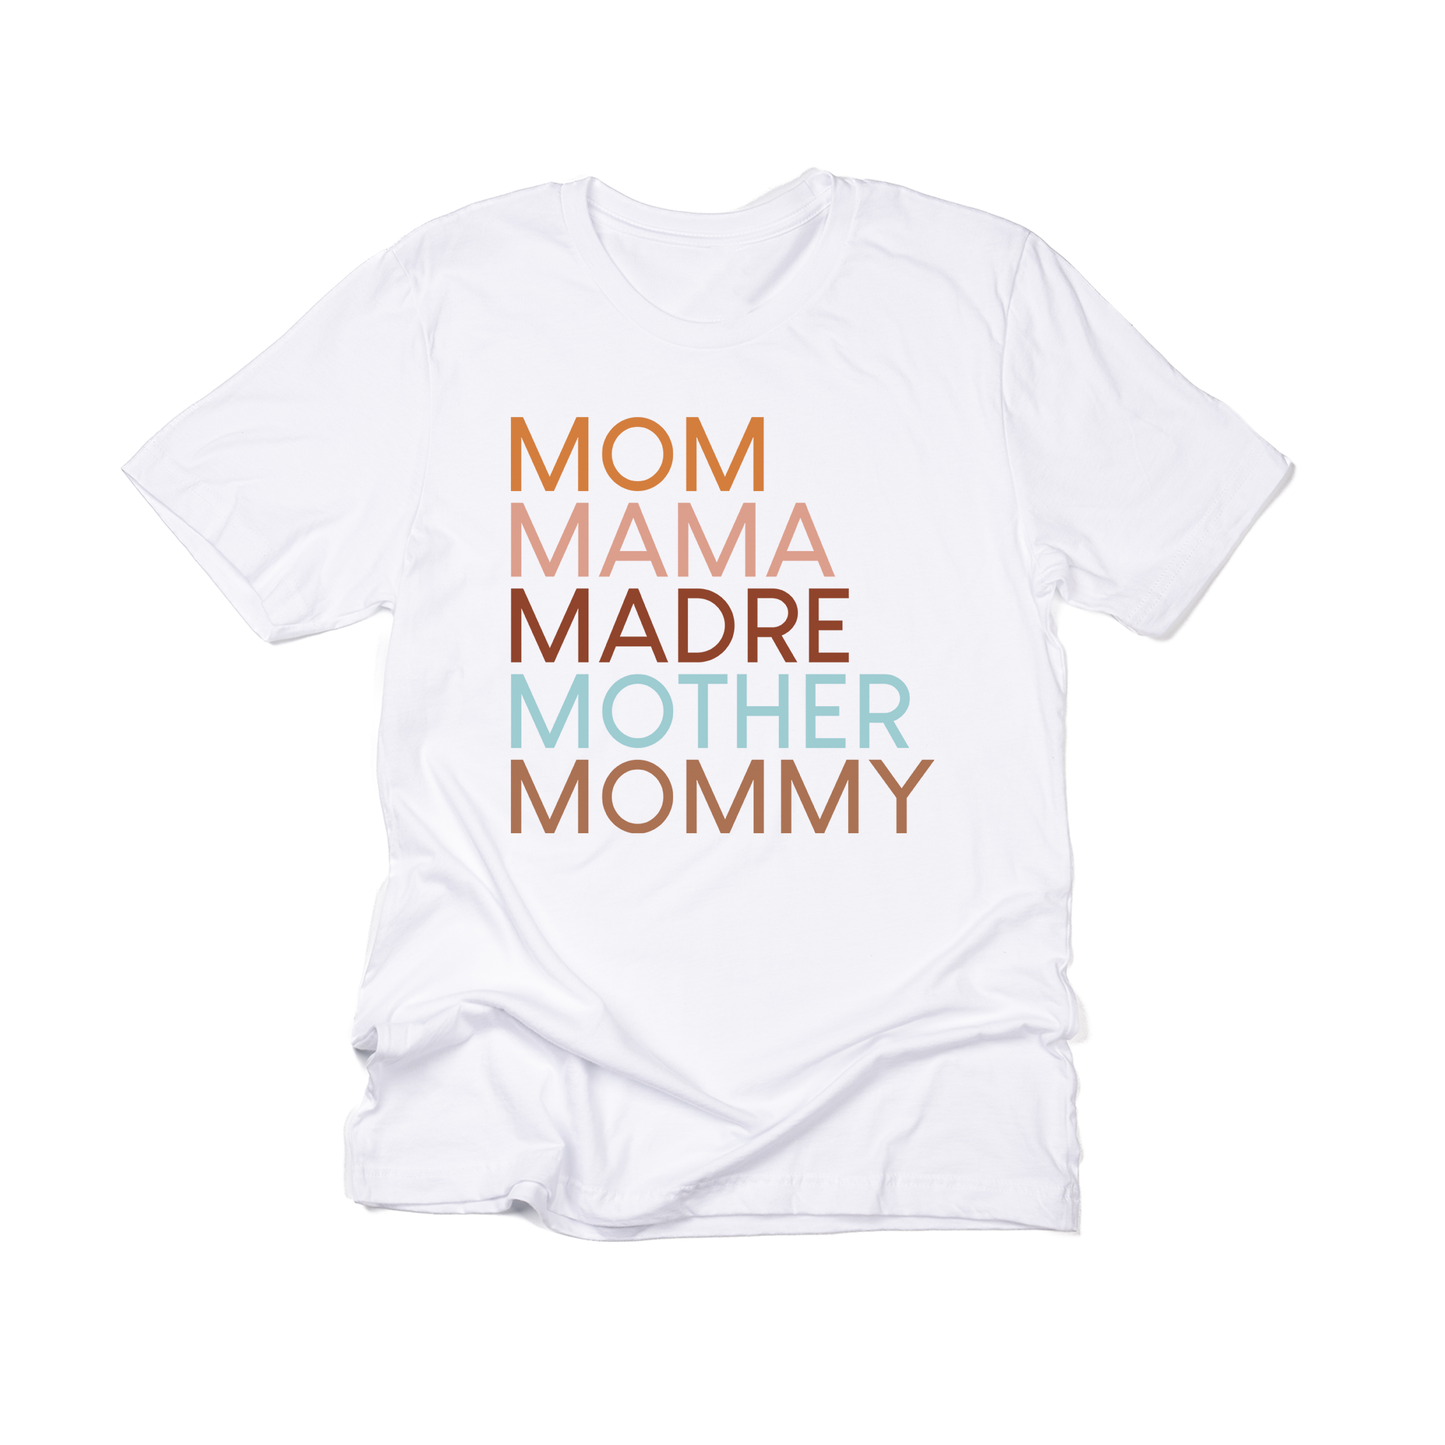 Mom Mama Madre Mother Mommy (Across Front) - Tee (White)